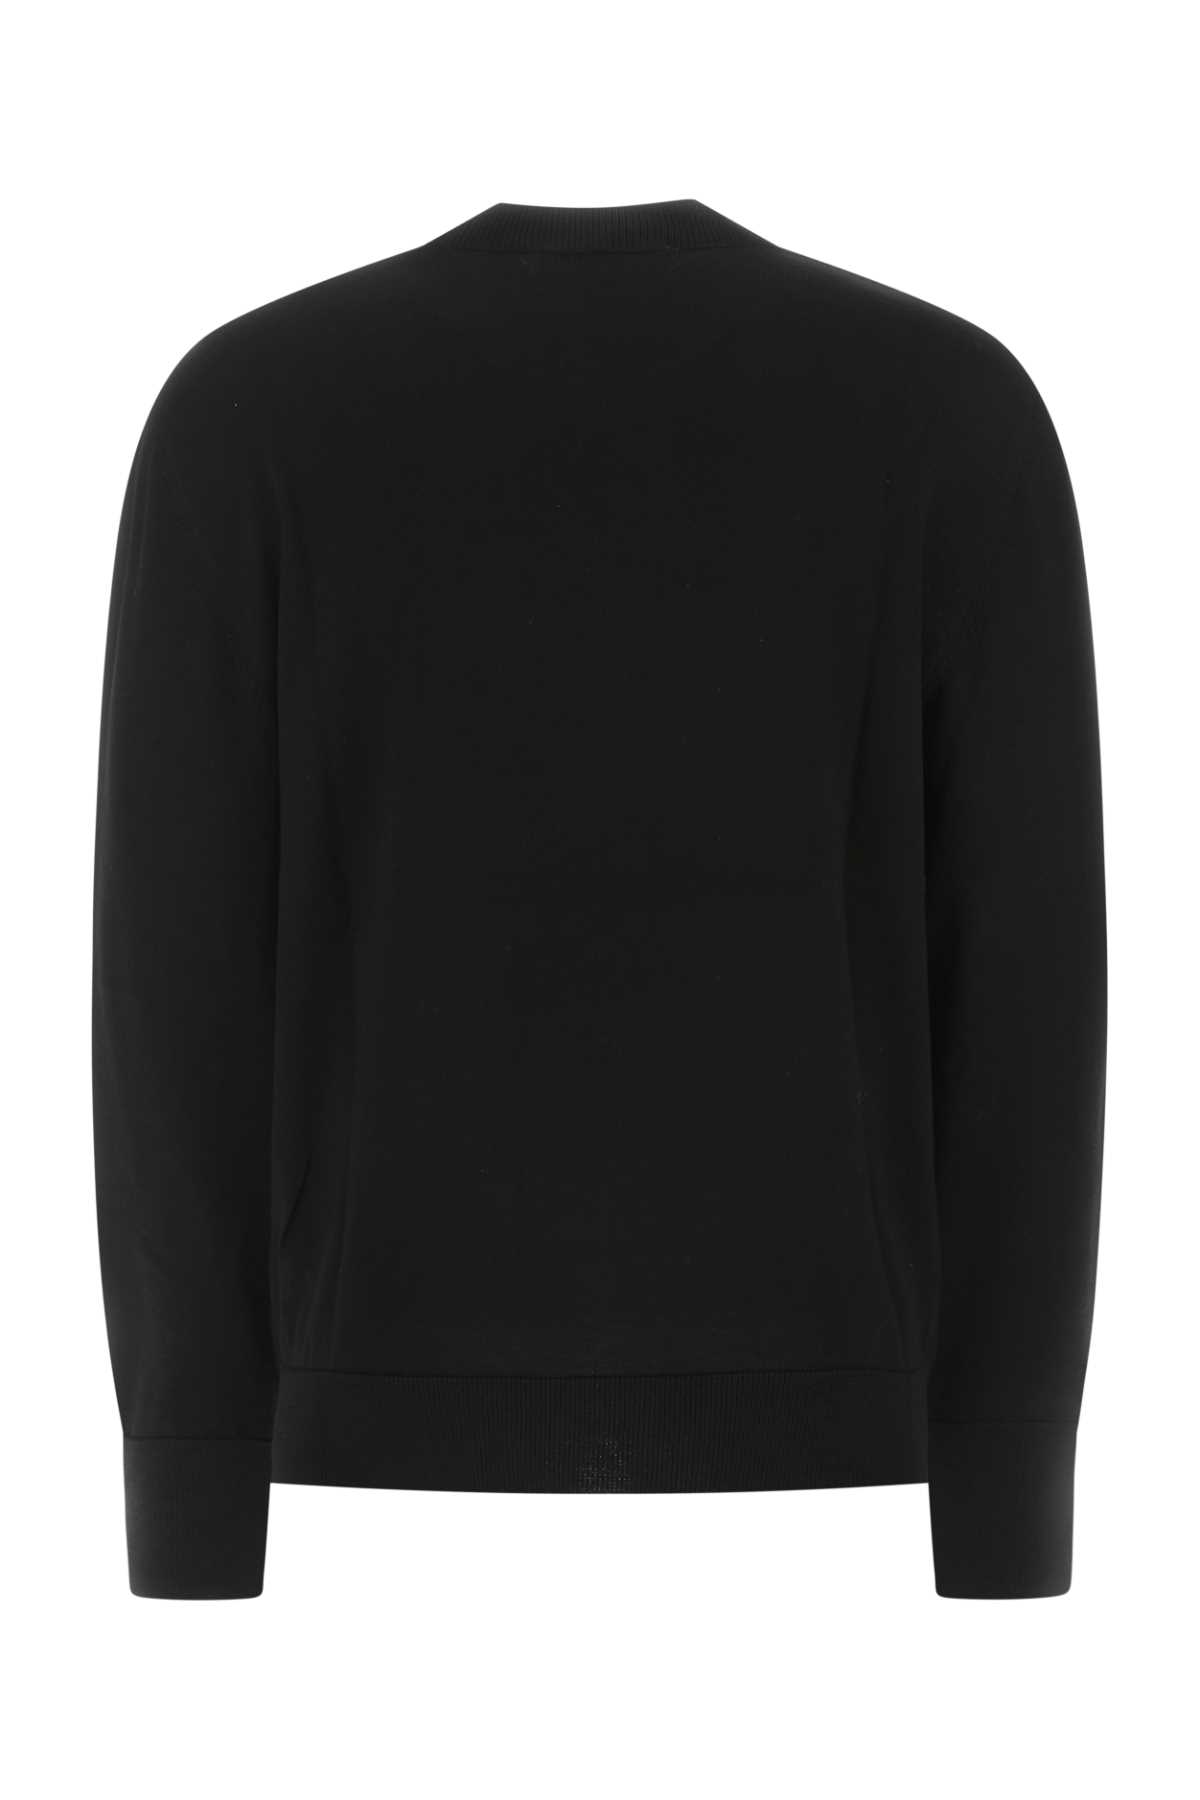 Versace Jeans Couture Black Wool Jumper In K42